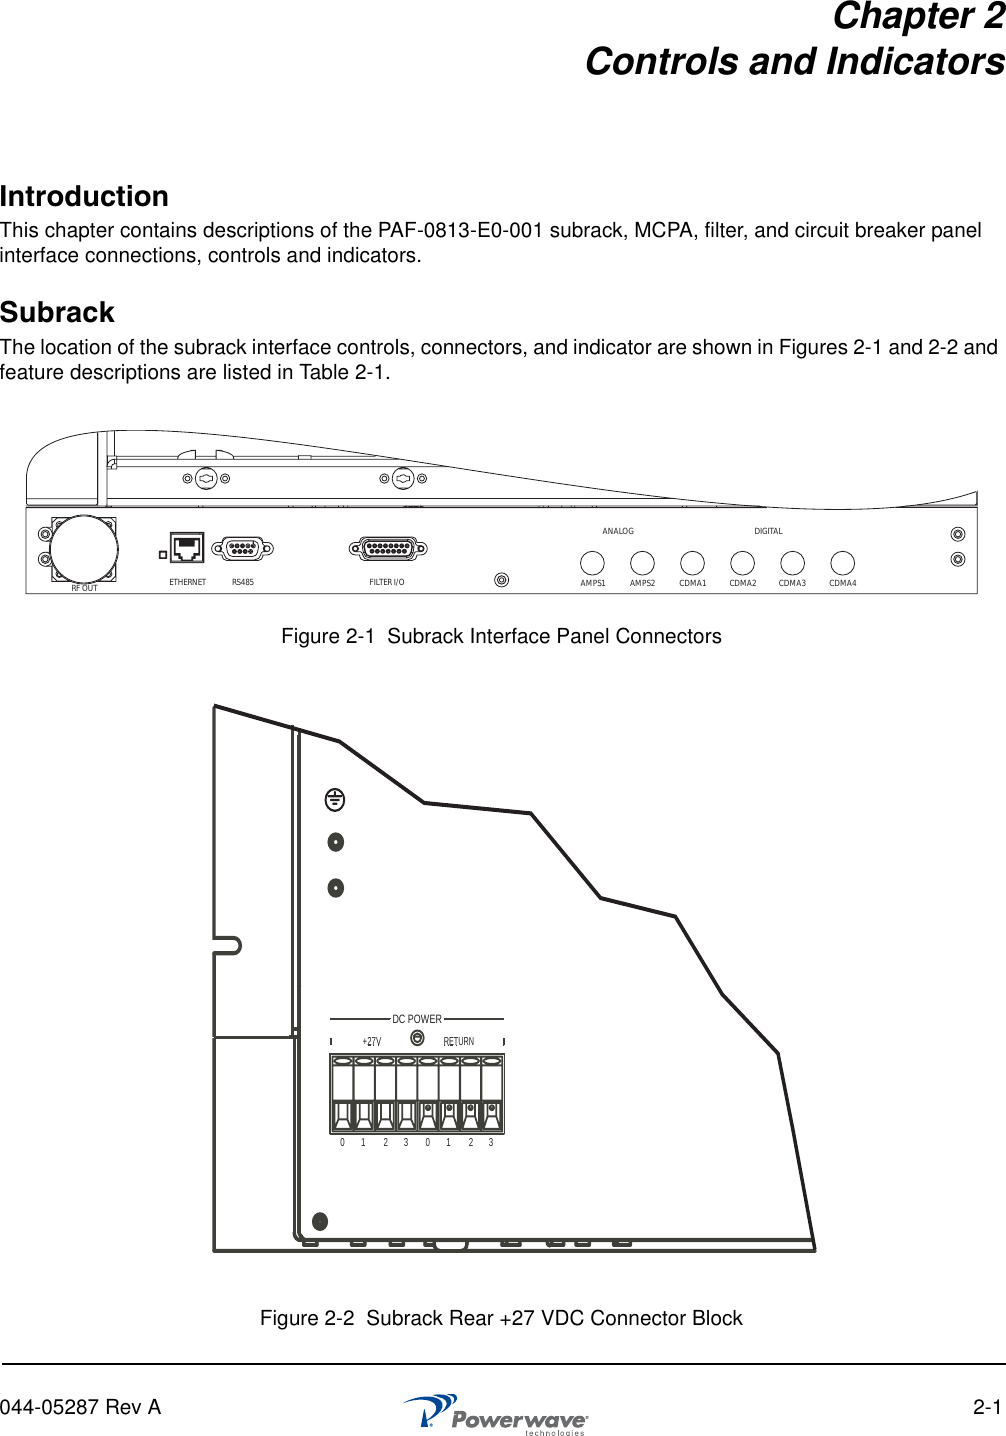 044-05287 Rev A 2-1Chapter 2Controls and IndicatorsIntroductionThis chapter contains descriptions of the PAF-0813-E0-001 subrack, MCPA, filter, and circuit breaker panel interface connections, controls and indicators. Subrack The location of the subrack interface controls, connectors, and indicator are shown in Figures 2-1 and 2-2 and feature descriptions are listed in Table 2-1.Figure 2-1  Subrack Interface Panel ConnectorsFigure 2-2  Subrack Rear +27 VDC Connector Block RF OUT ETHERNET  RS485 FILTER I/O AMPS1 AMPS2 CDMA1 CDMA2 CDMA3 CDMA4DIGITALANALOGDC POWER+27VRETURN01230123